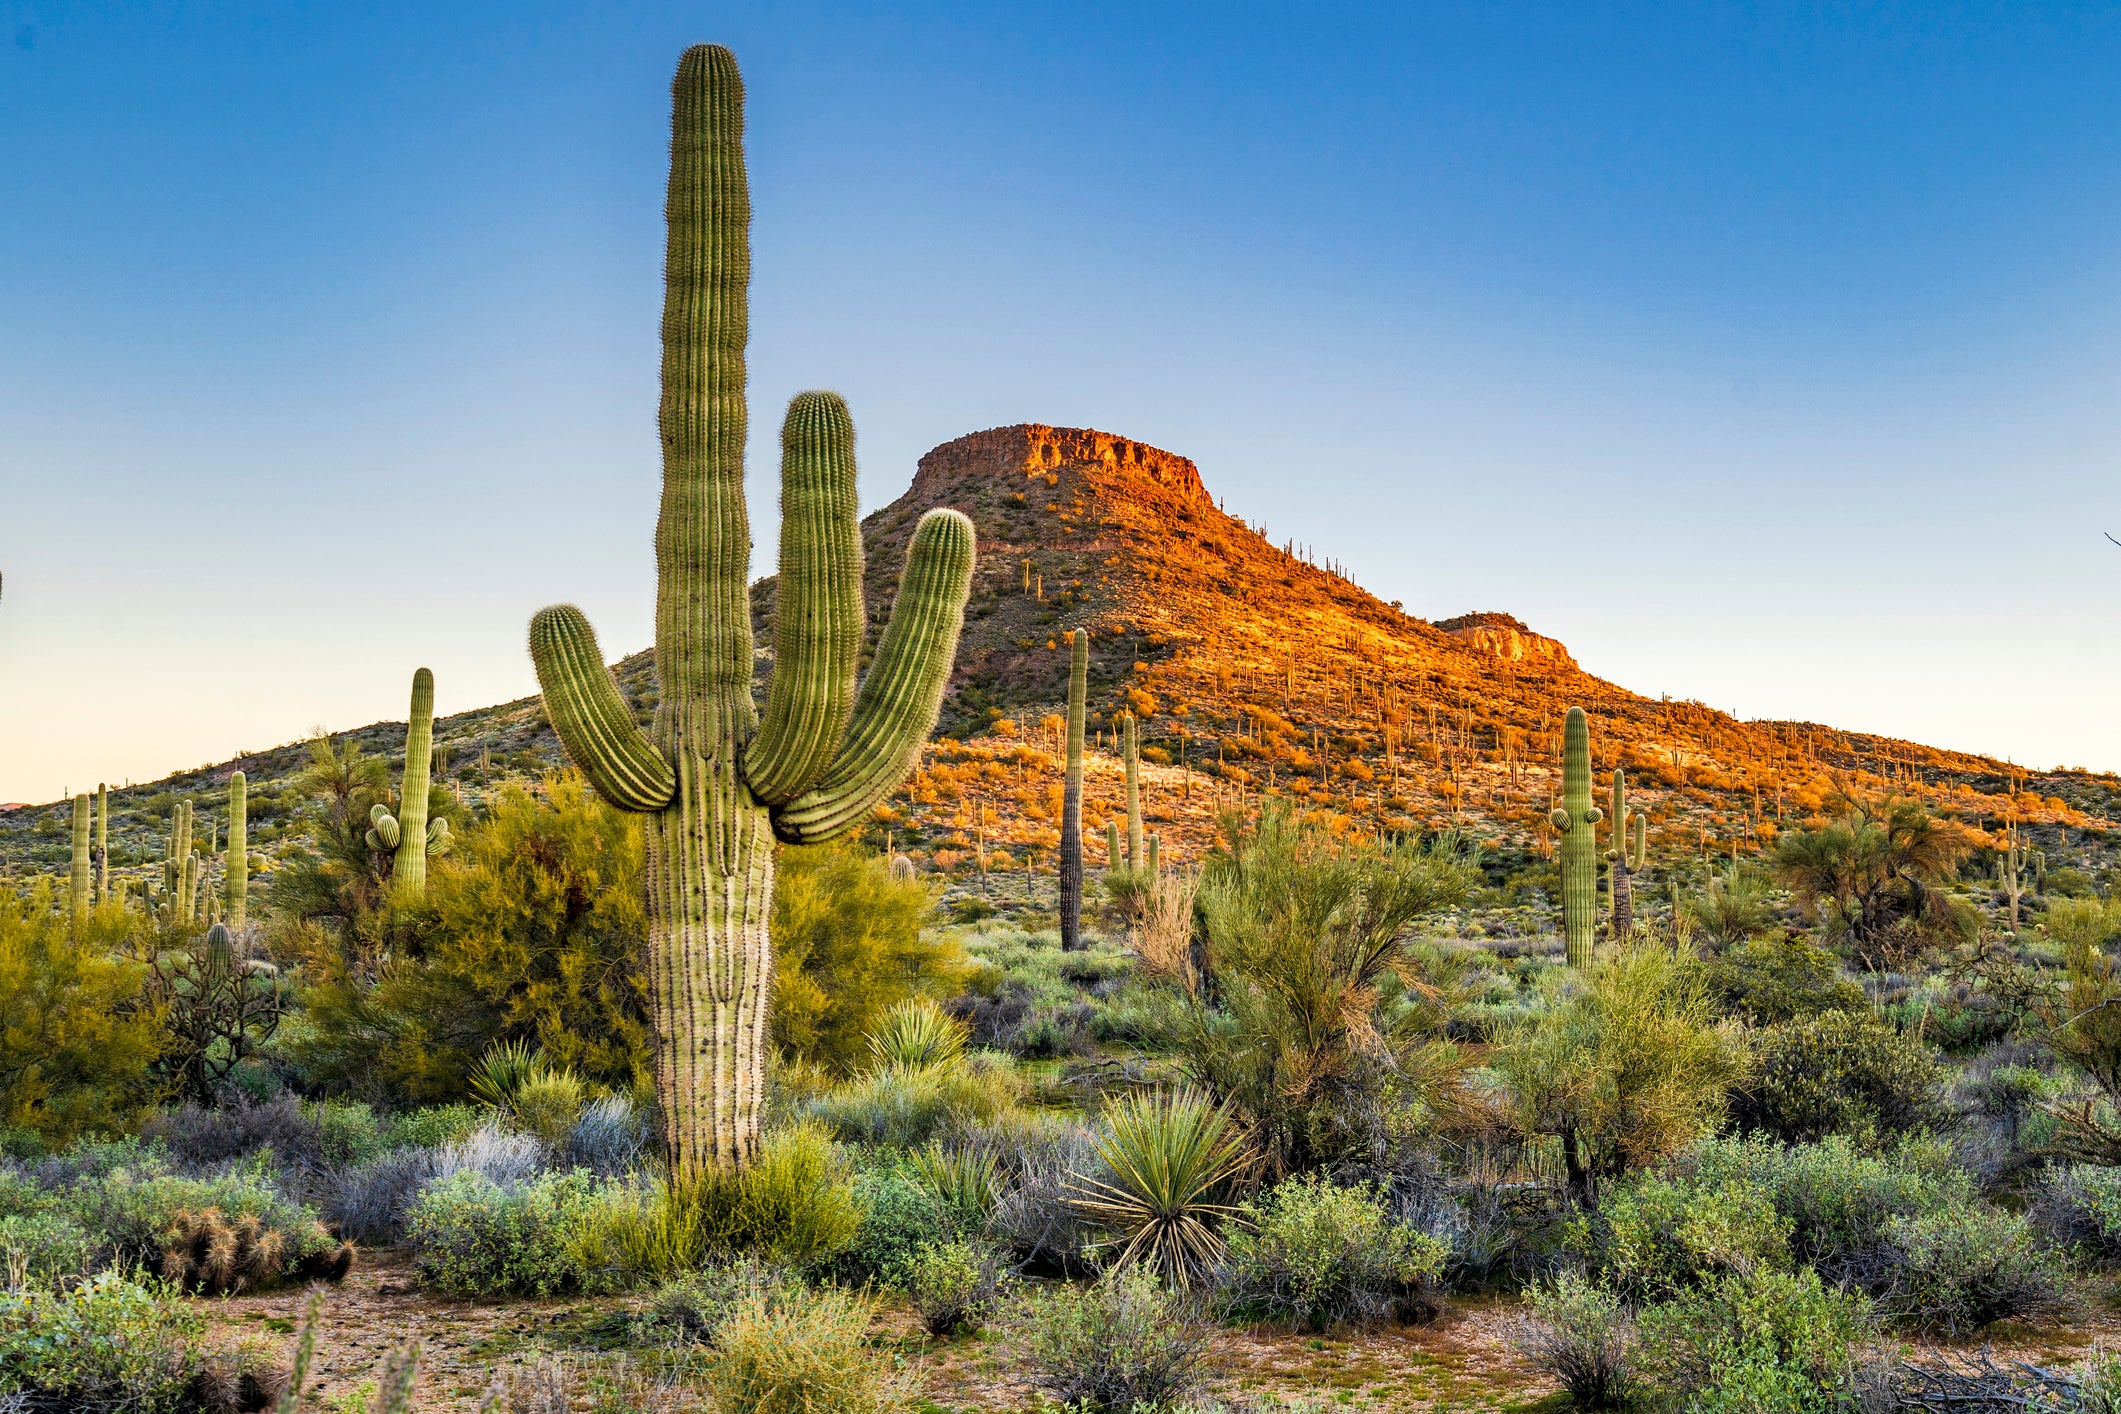 Get Lost: A Socially Distant 72 Hours In Scottsdale